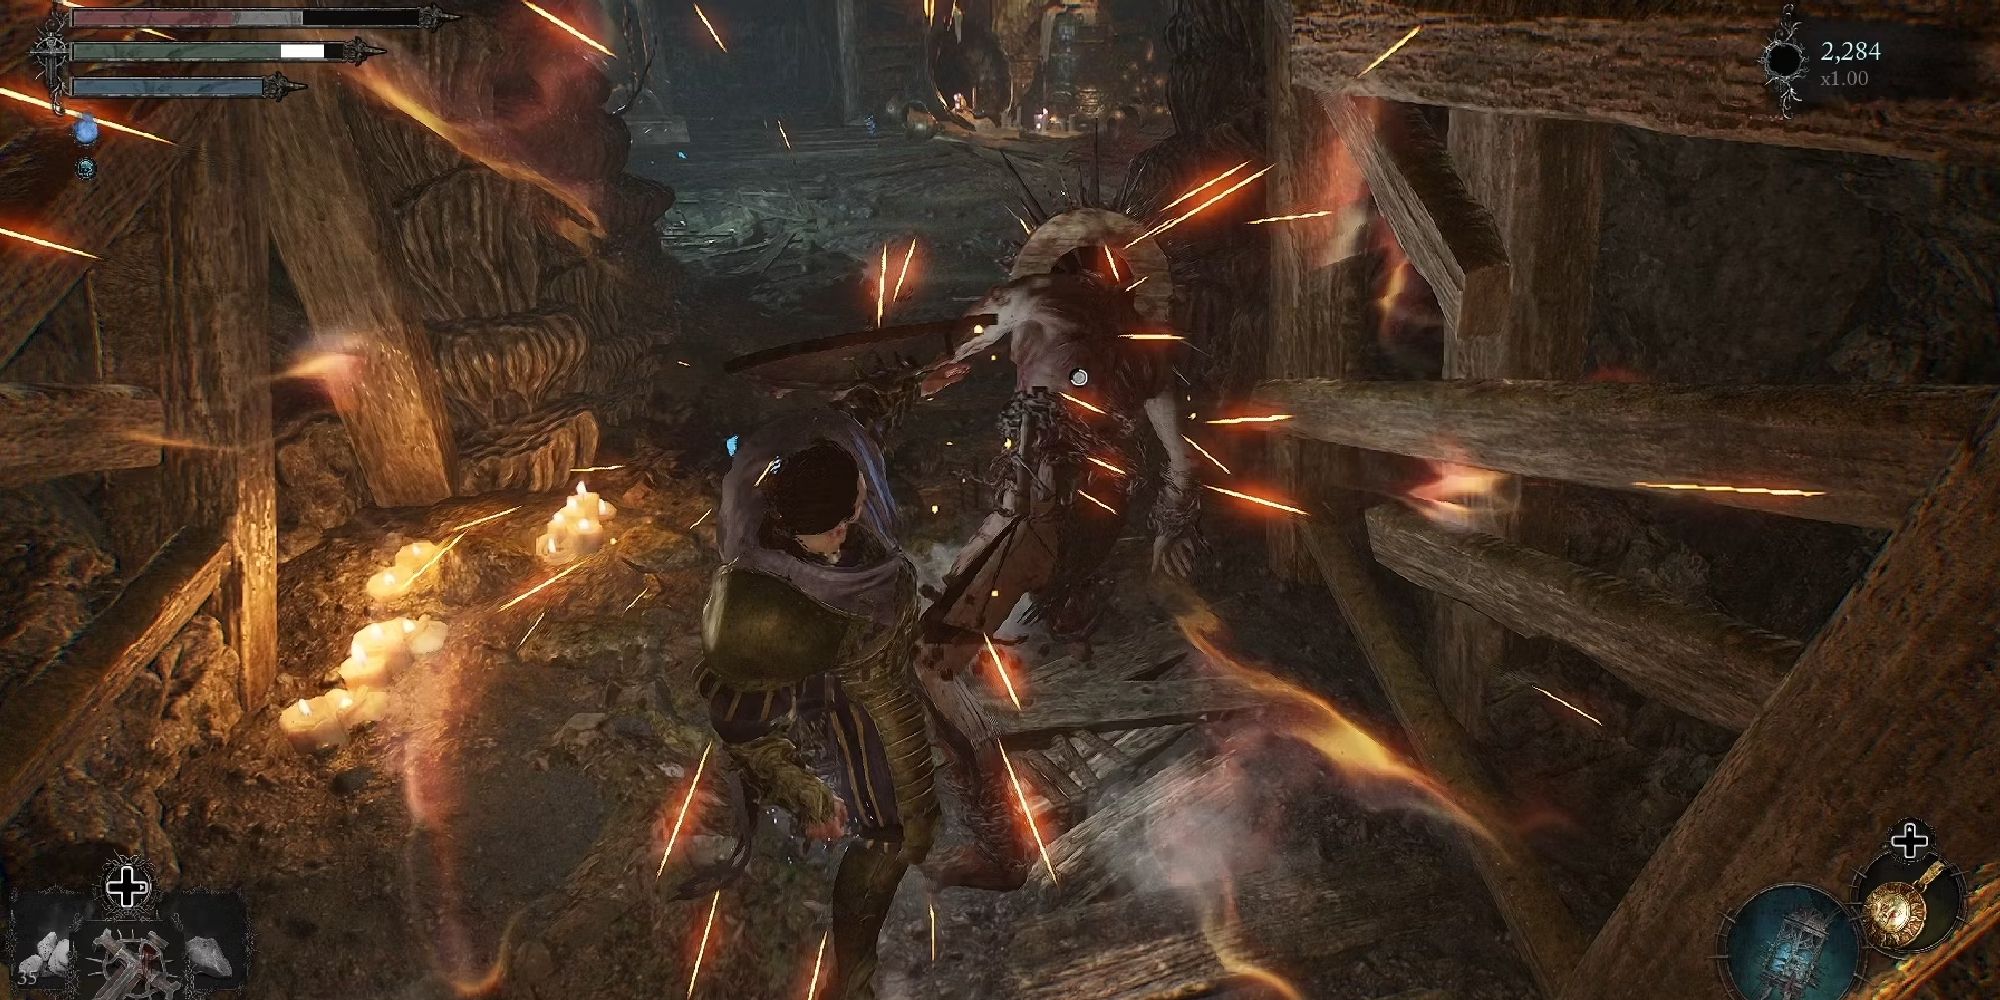 Player parrying an enemy attack Lords of the Fallen